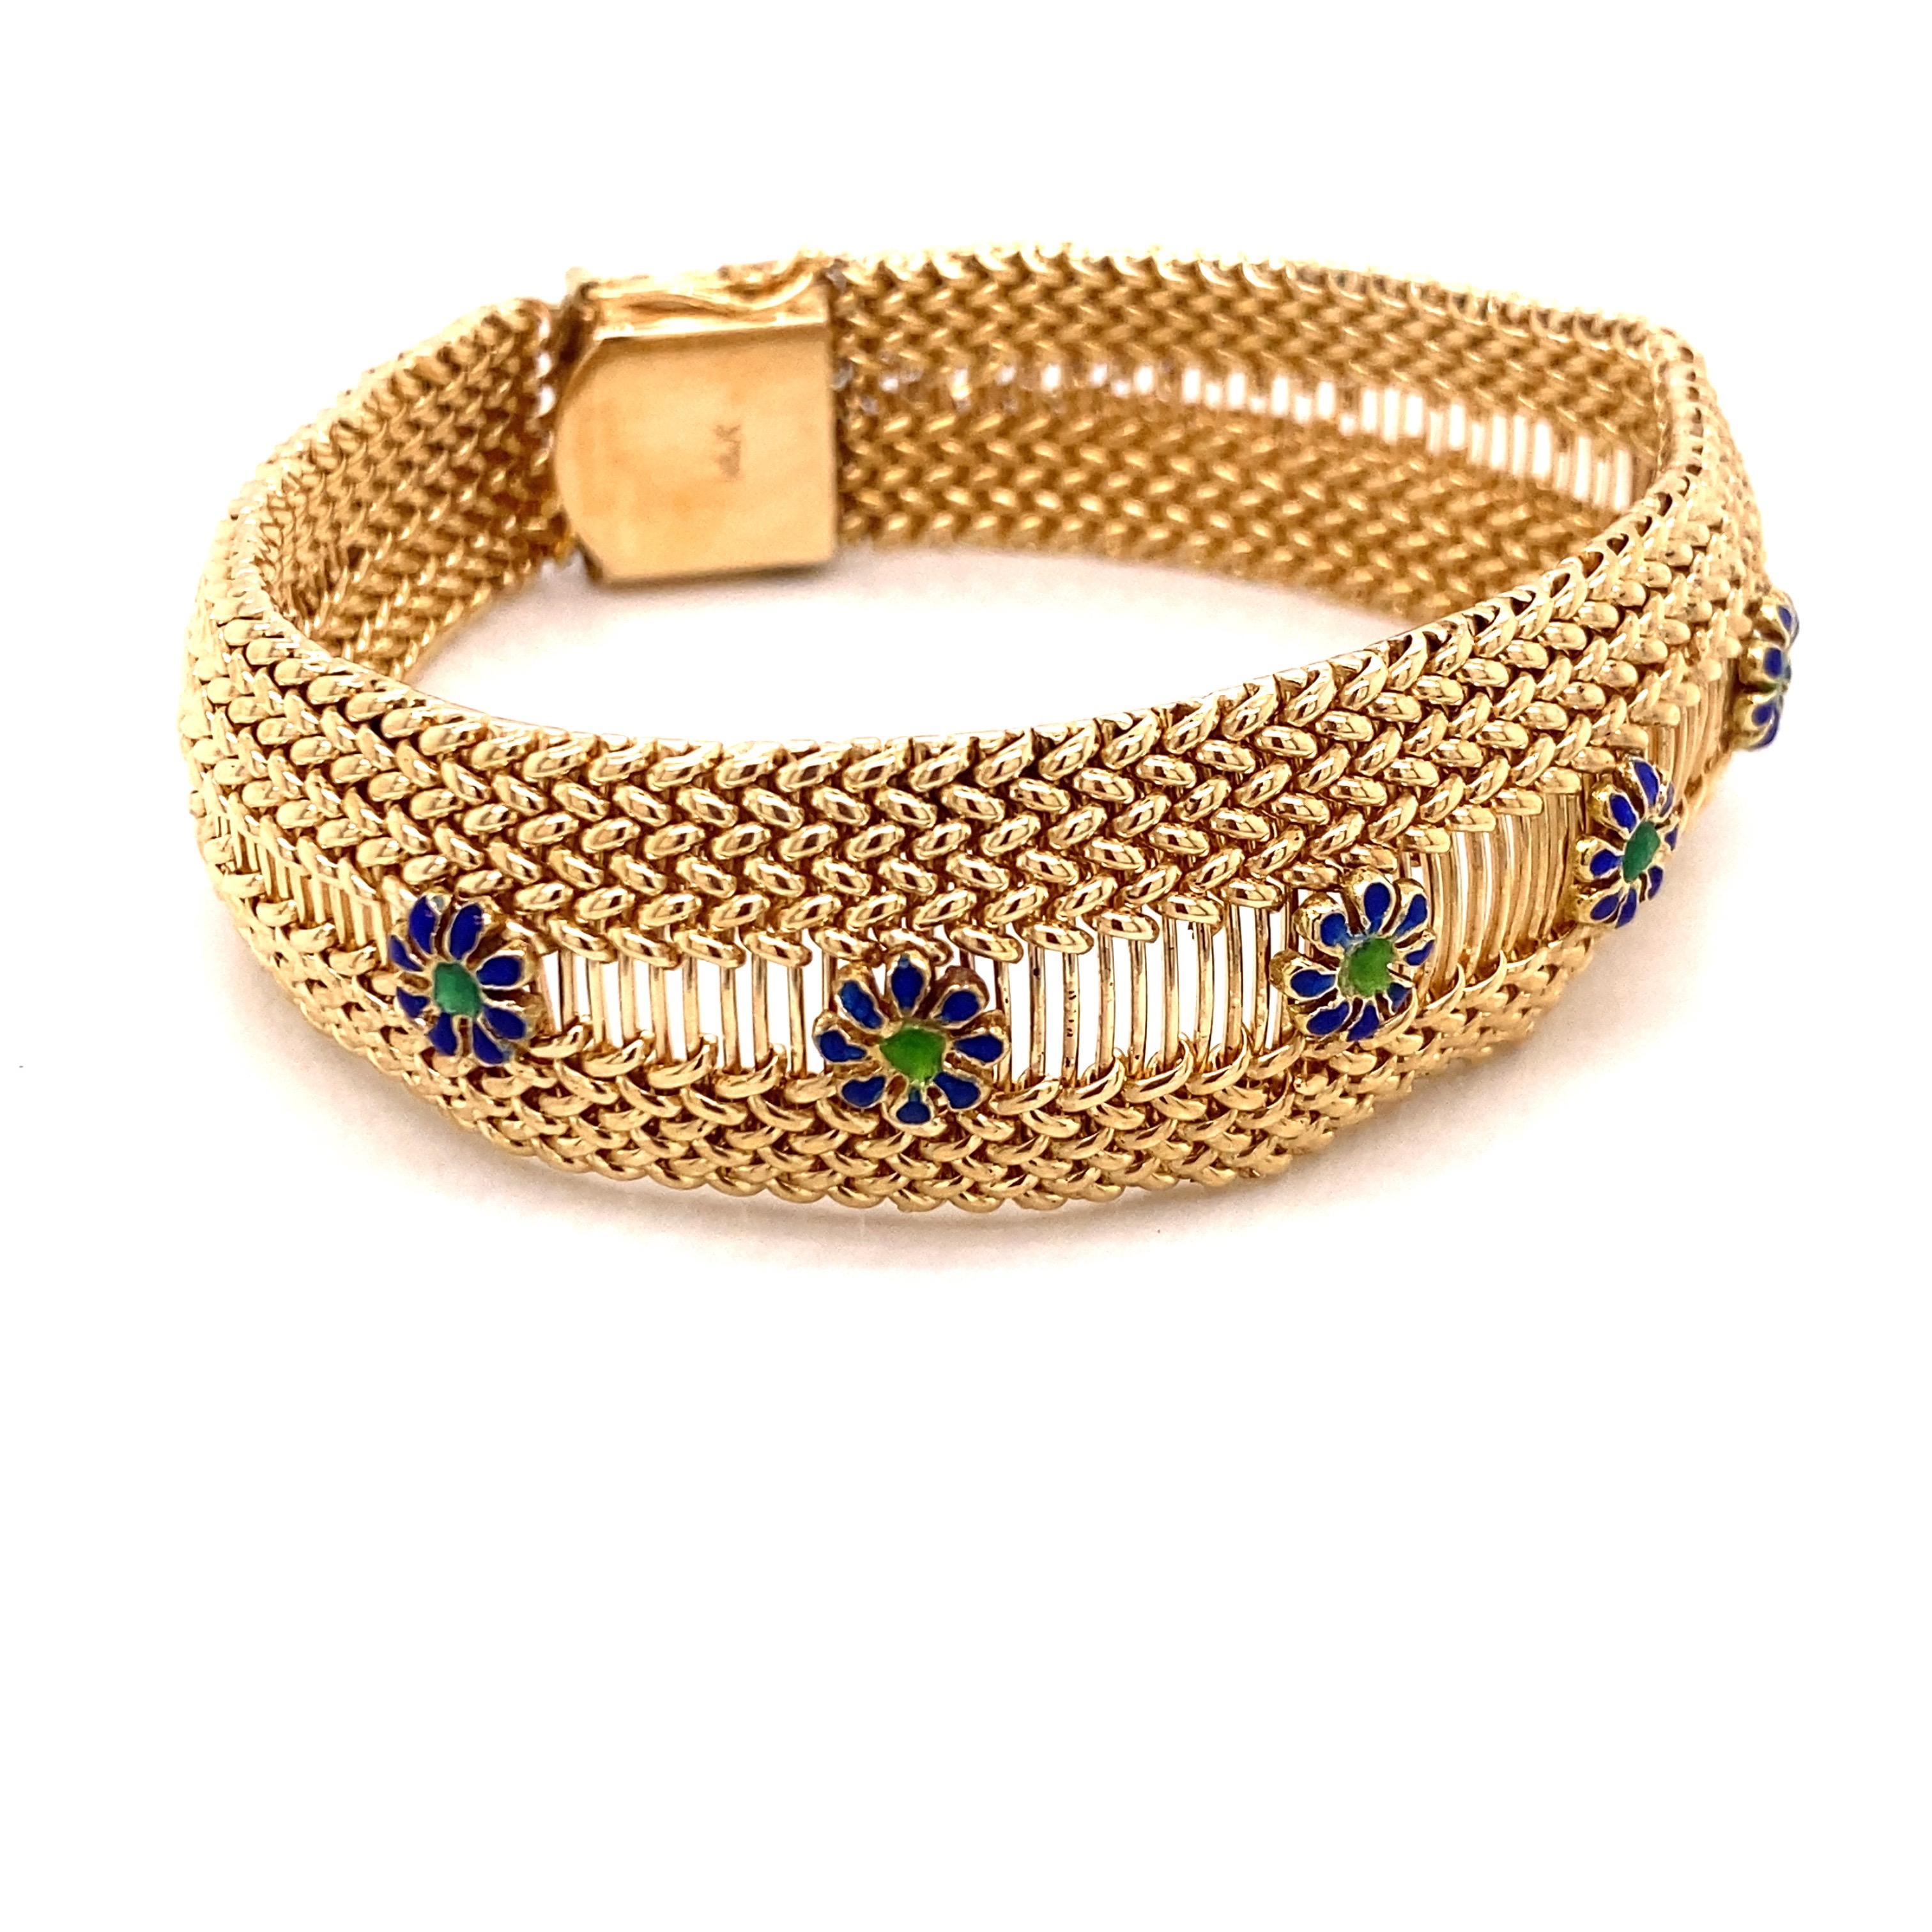 Vintage 1960s 14K Yellow Gold Mesh Bracelet with Enamel Flowers and Rubies - The bracelet measures 7.5 inches long and .80 inches wide in the center. There are 6 flowers with blue enamel petals and green enamel center. The bracelet features a hidden